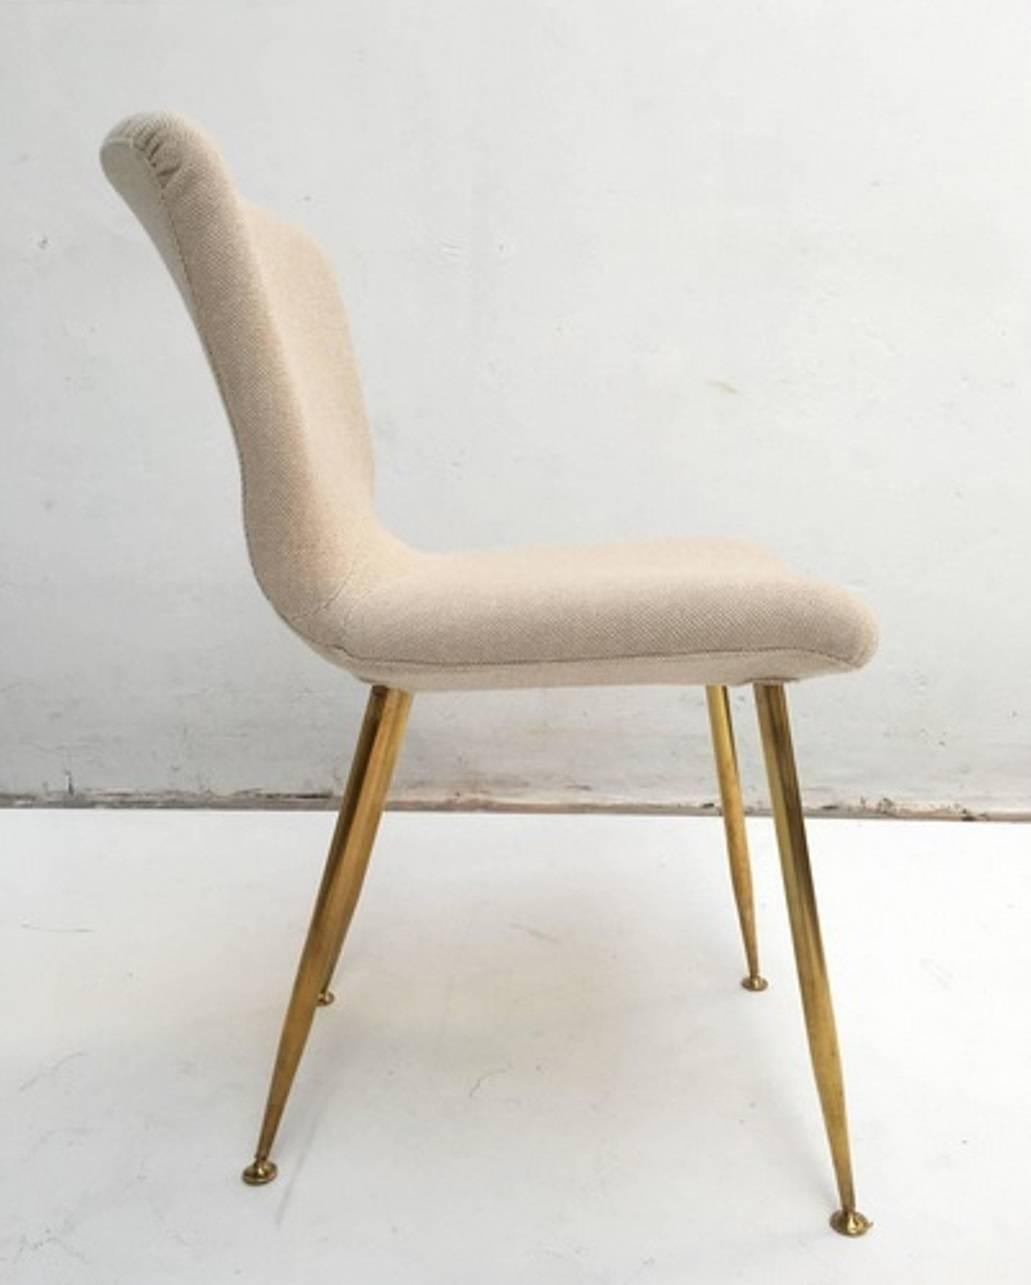 Single dining chair designed by famed French artist, decorator and designer Louis Sognot (1892-1970) in 1959 for Arflex, Italy. Seating restored. 

The seating on this chair has been fully restored comprising new original high specification